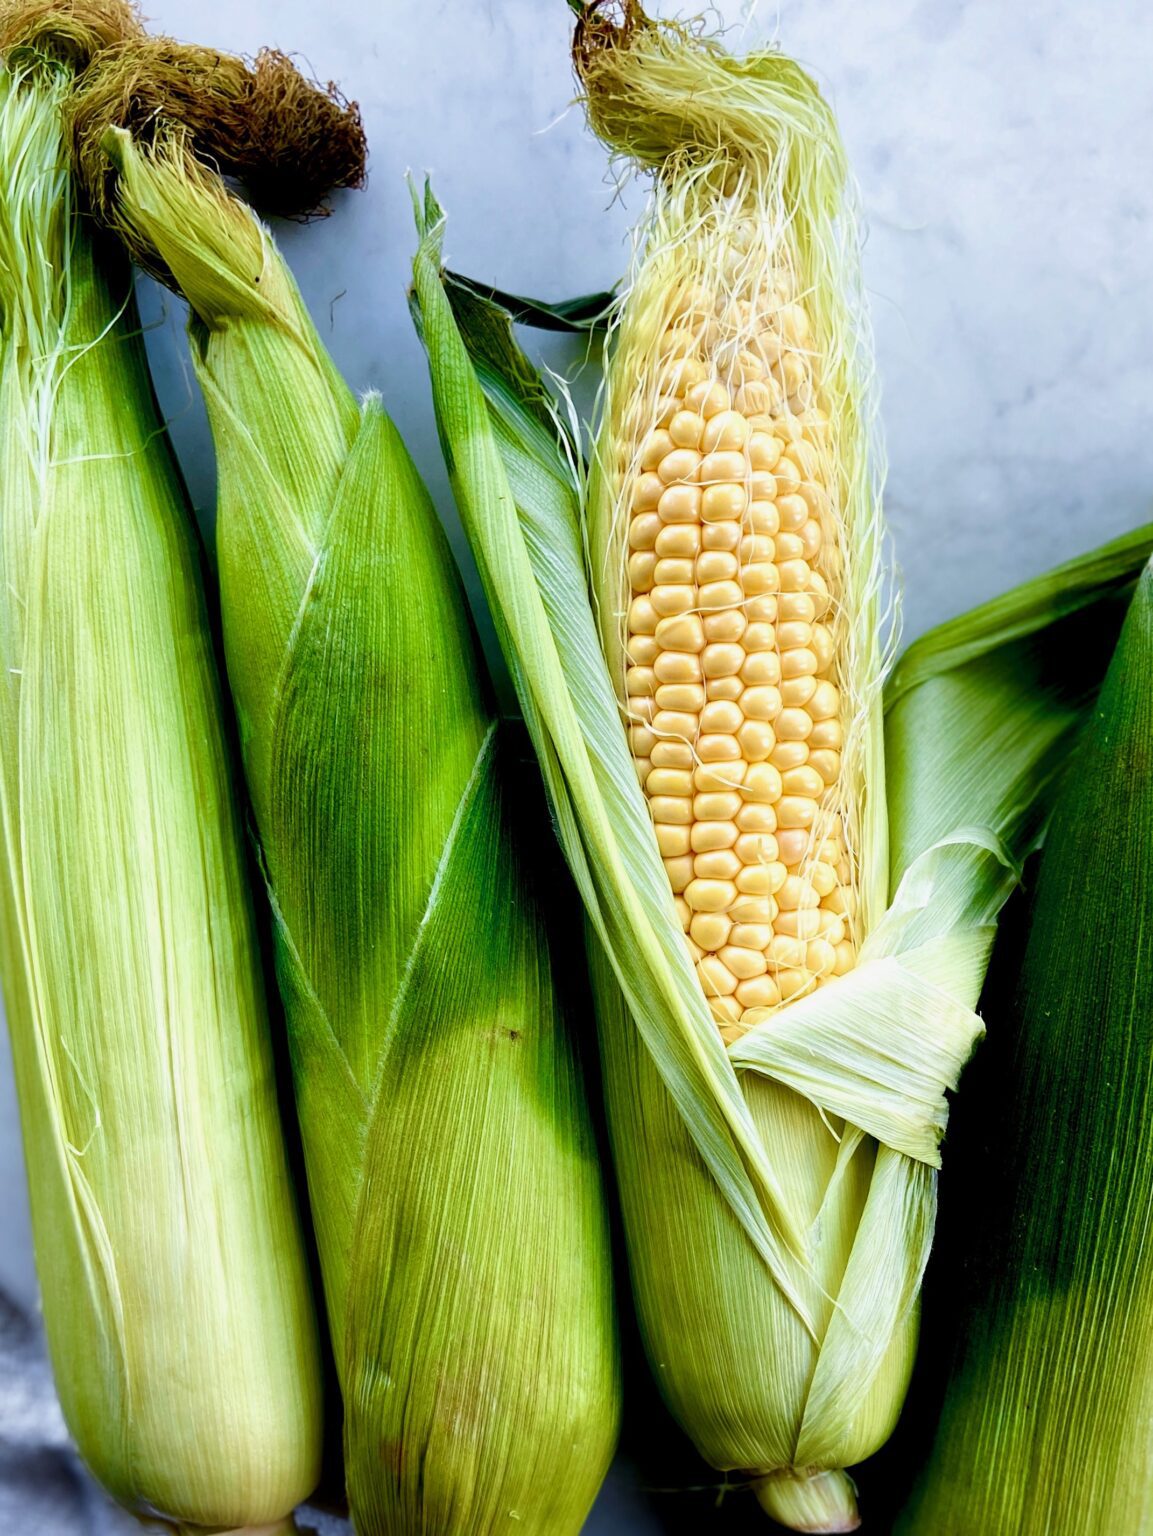 The golden ingredient for this month's Root-to-Leaf column is corn